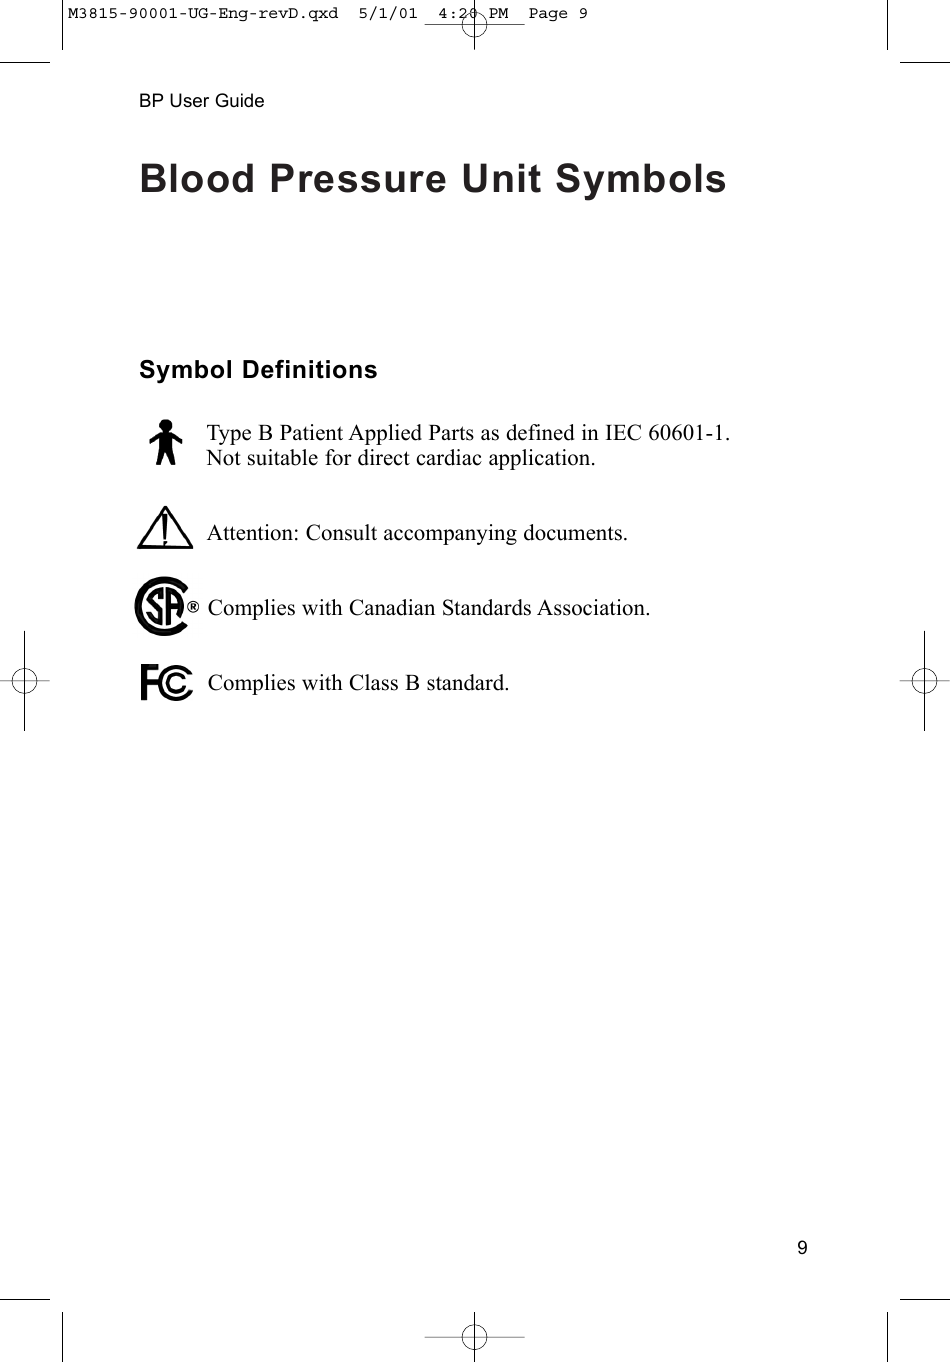 Blood Pressure Unit Symbols9BP User GuideSymbol DefinitionsType B Patient Applied Parts as defined in IEC 60601-1.Not suitable for direct cardiac application.Attention: Consult accompanying documents.Complies with Canadian Standards Association.Complies with Class B standard.M3815-90001-UG-Eng-revD.qxd  5/1/01  4:20 PM  Page 9